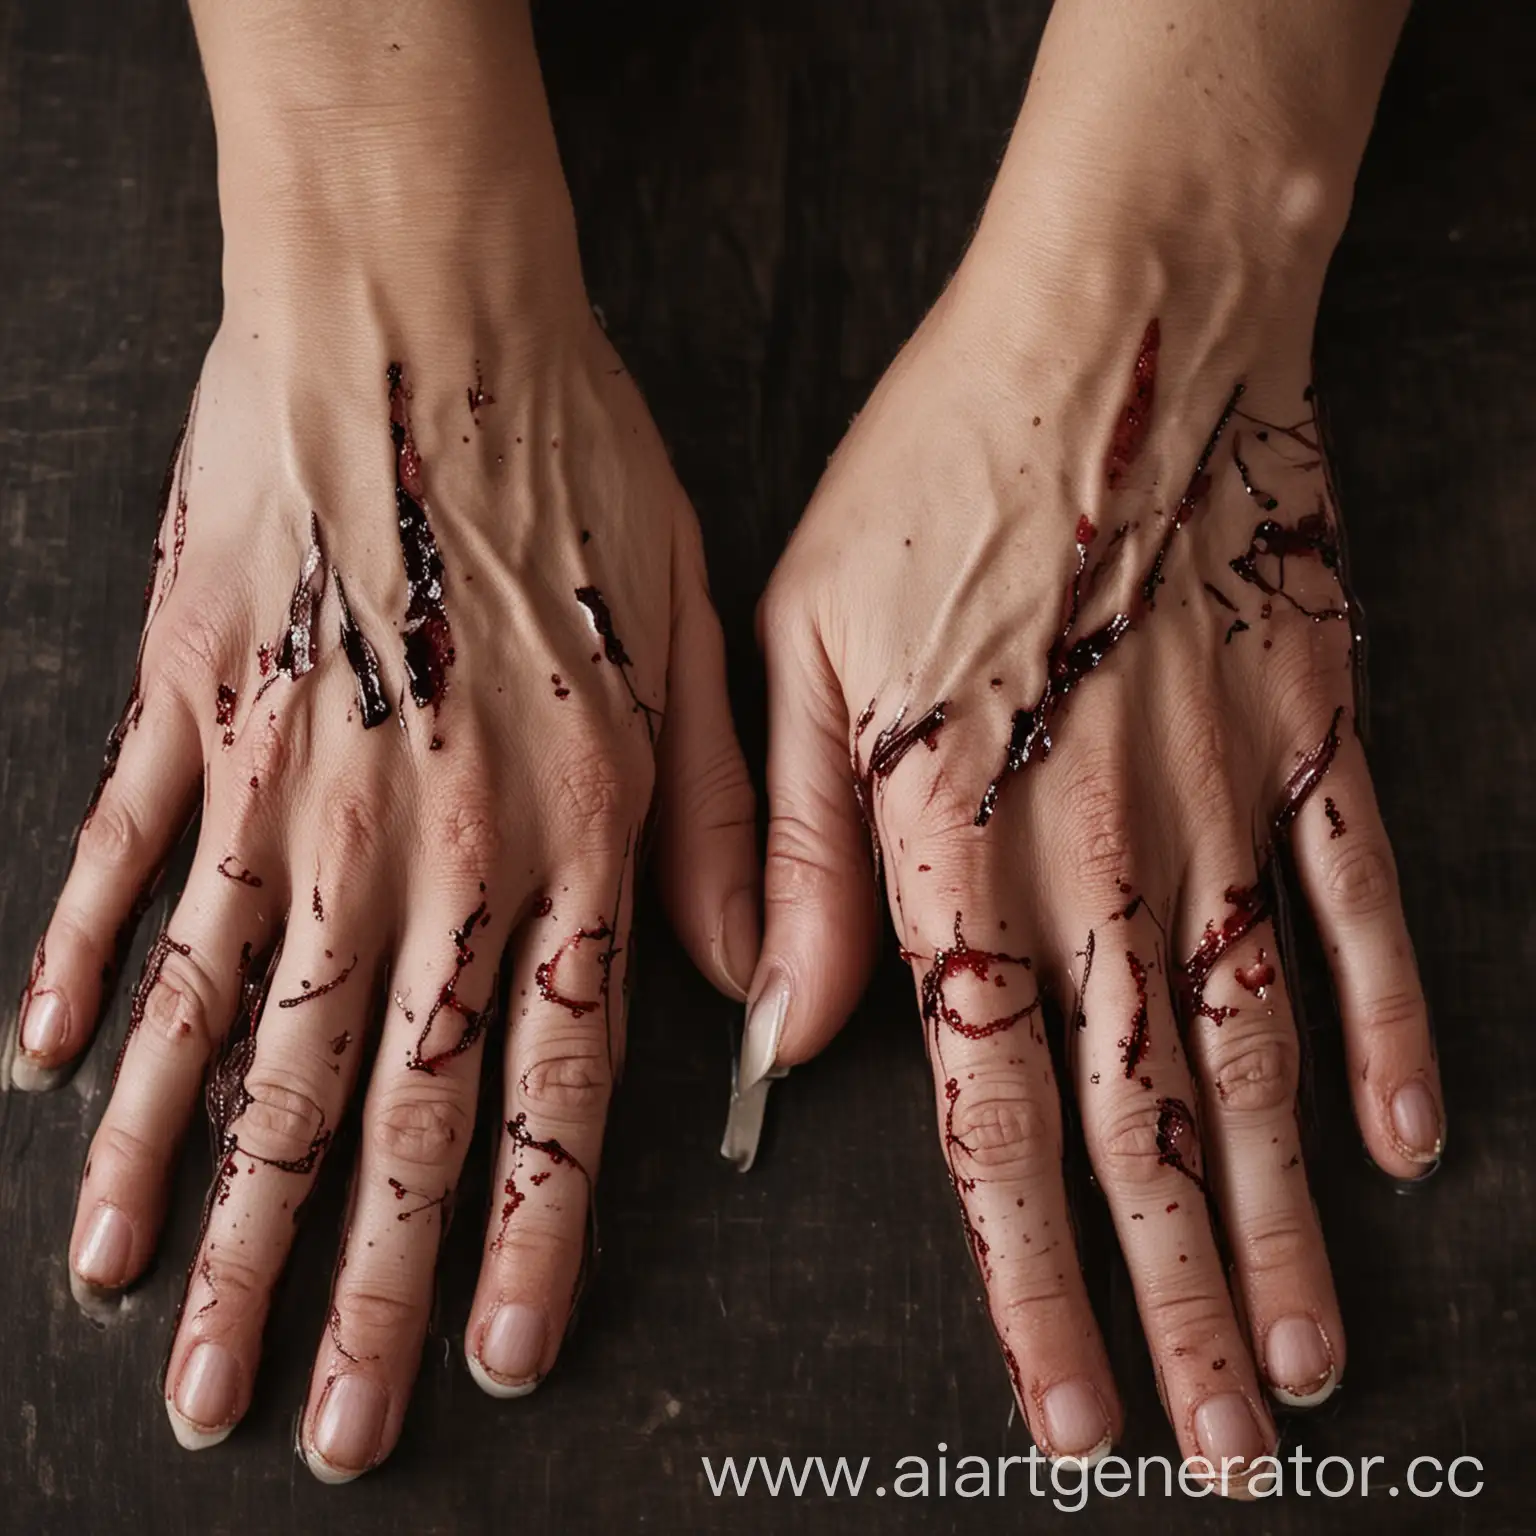 Hands-with-Wounds-Medical-Treatment-Concept